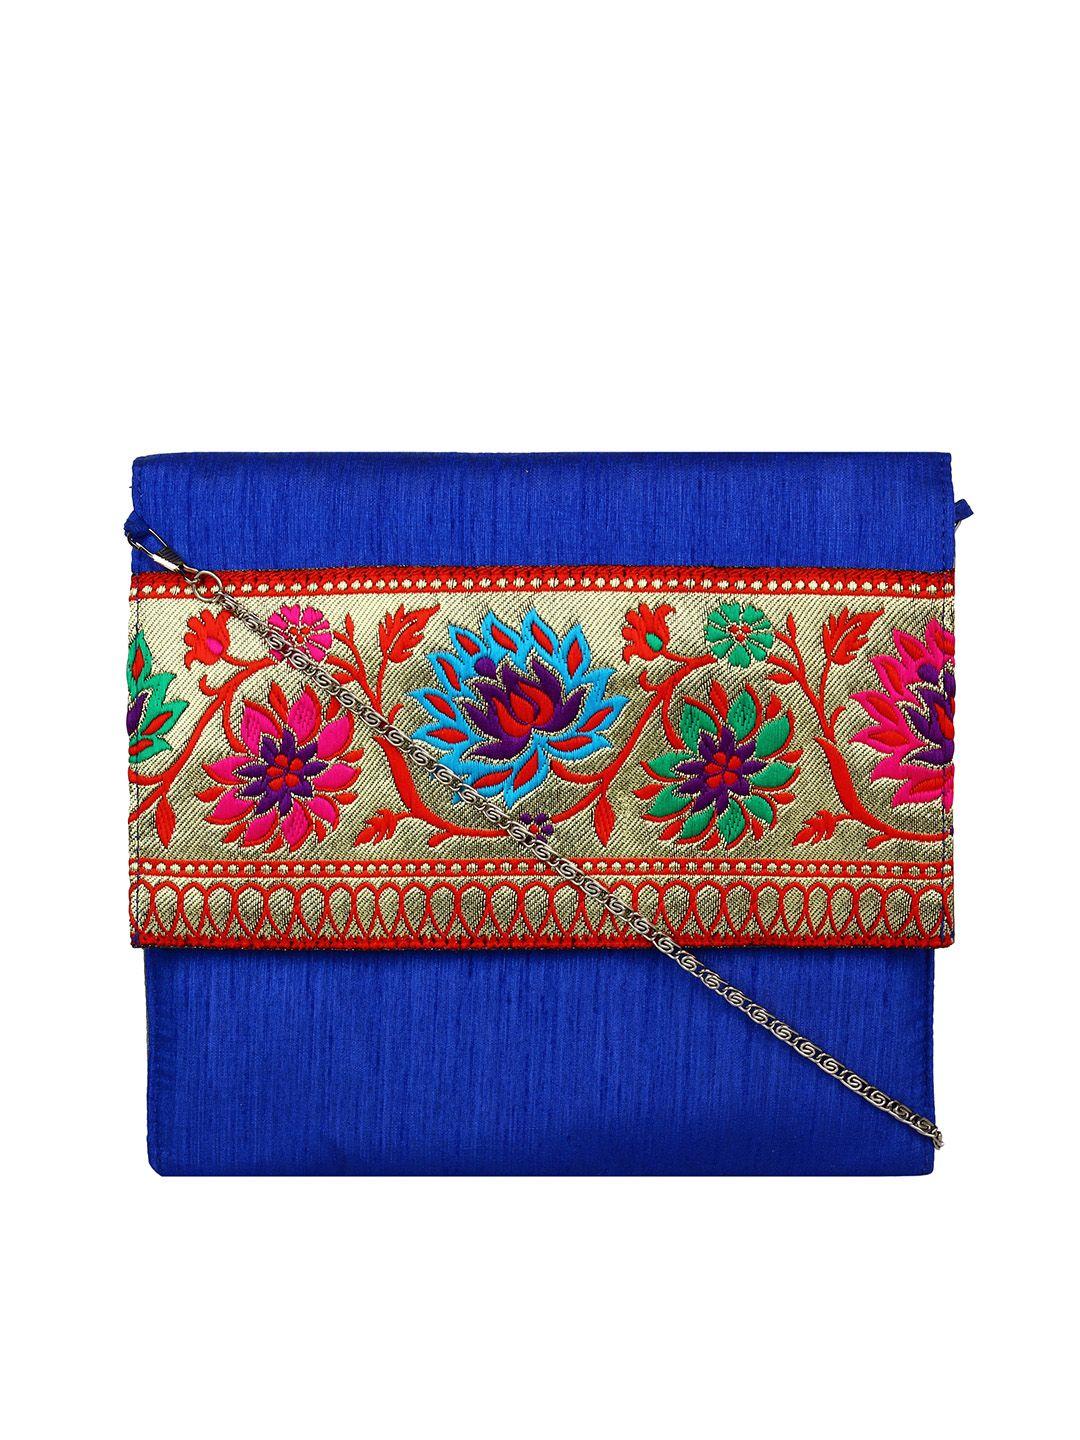 anekaant blue embroidered clutch with sling strap